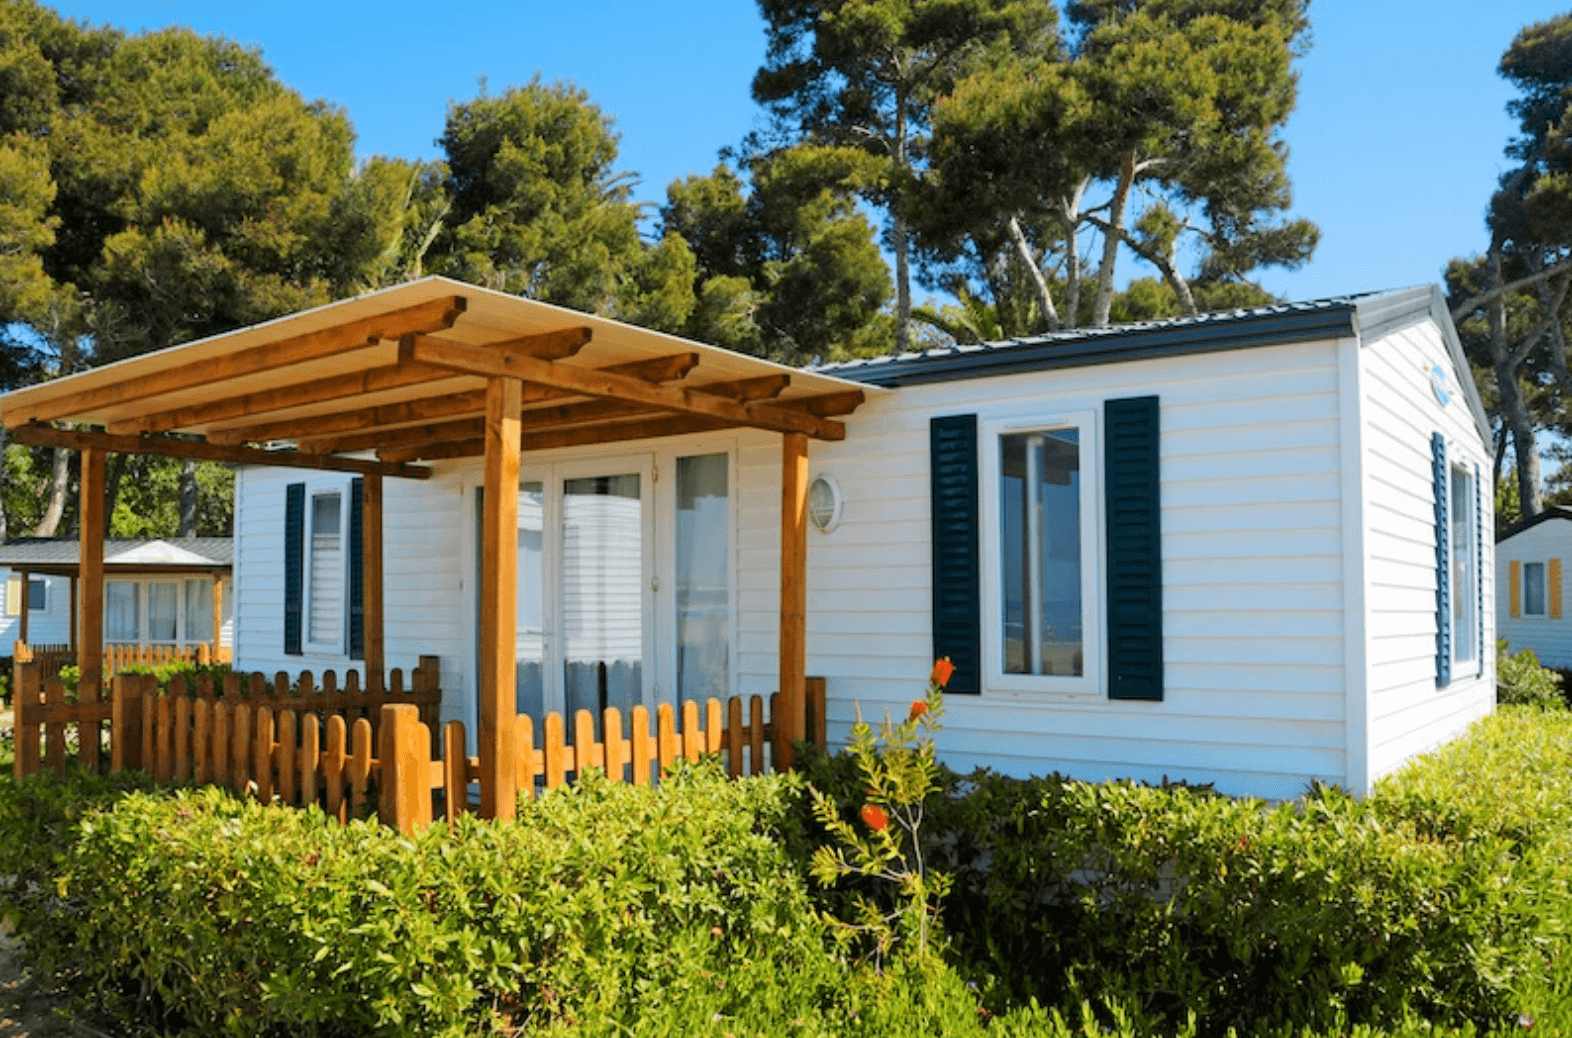 The Ins and Outs of Manufactured Homes: A Buyer’s Guide